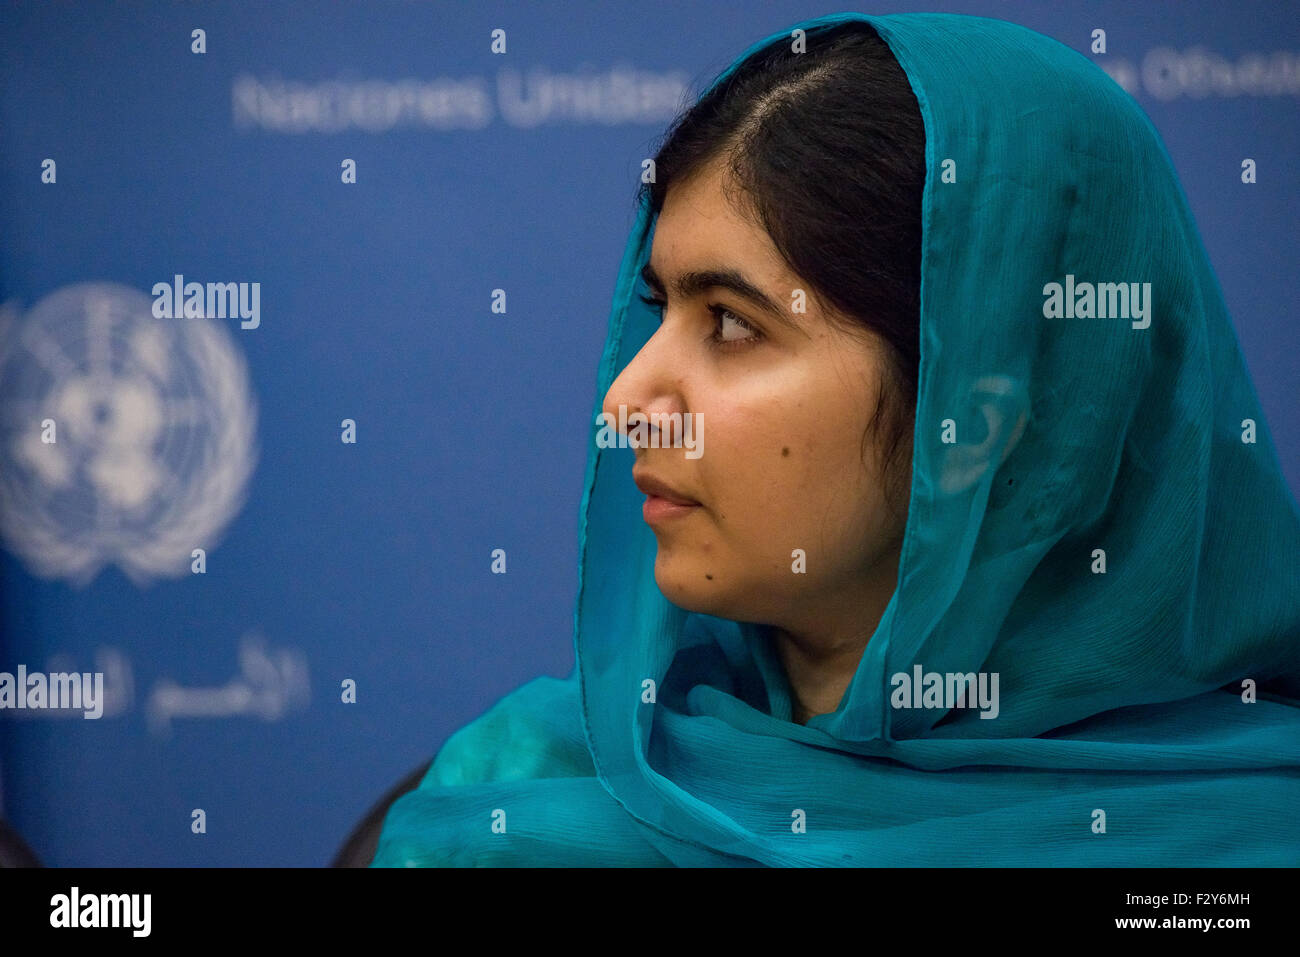 New York, United States. 22nd Sep, 2015. Malala Yousafzai, accompanied by four other young women, spoke at a press conference at the United Nations, emphasizing the need to expand educational opportunities in Pakistan. © Albin Lohr-Jones/Pacific Press/Alamy Live News Stock Photo